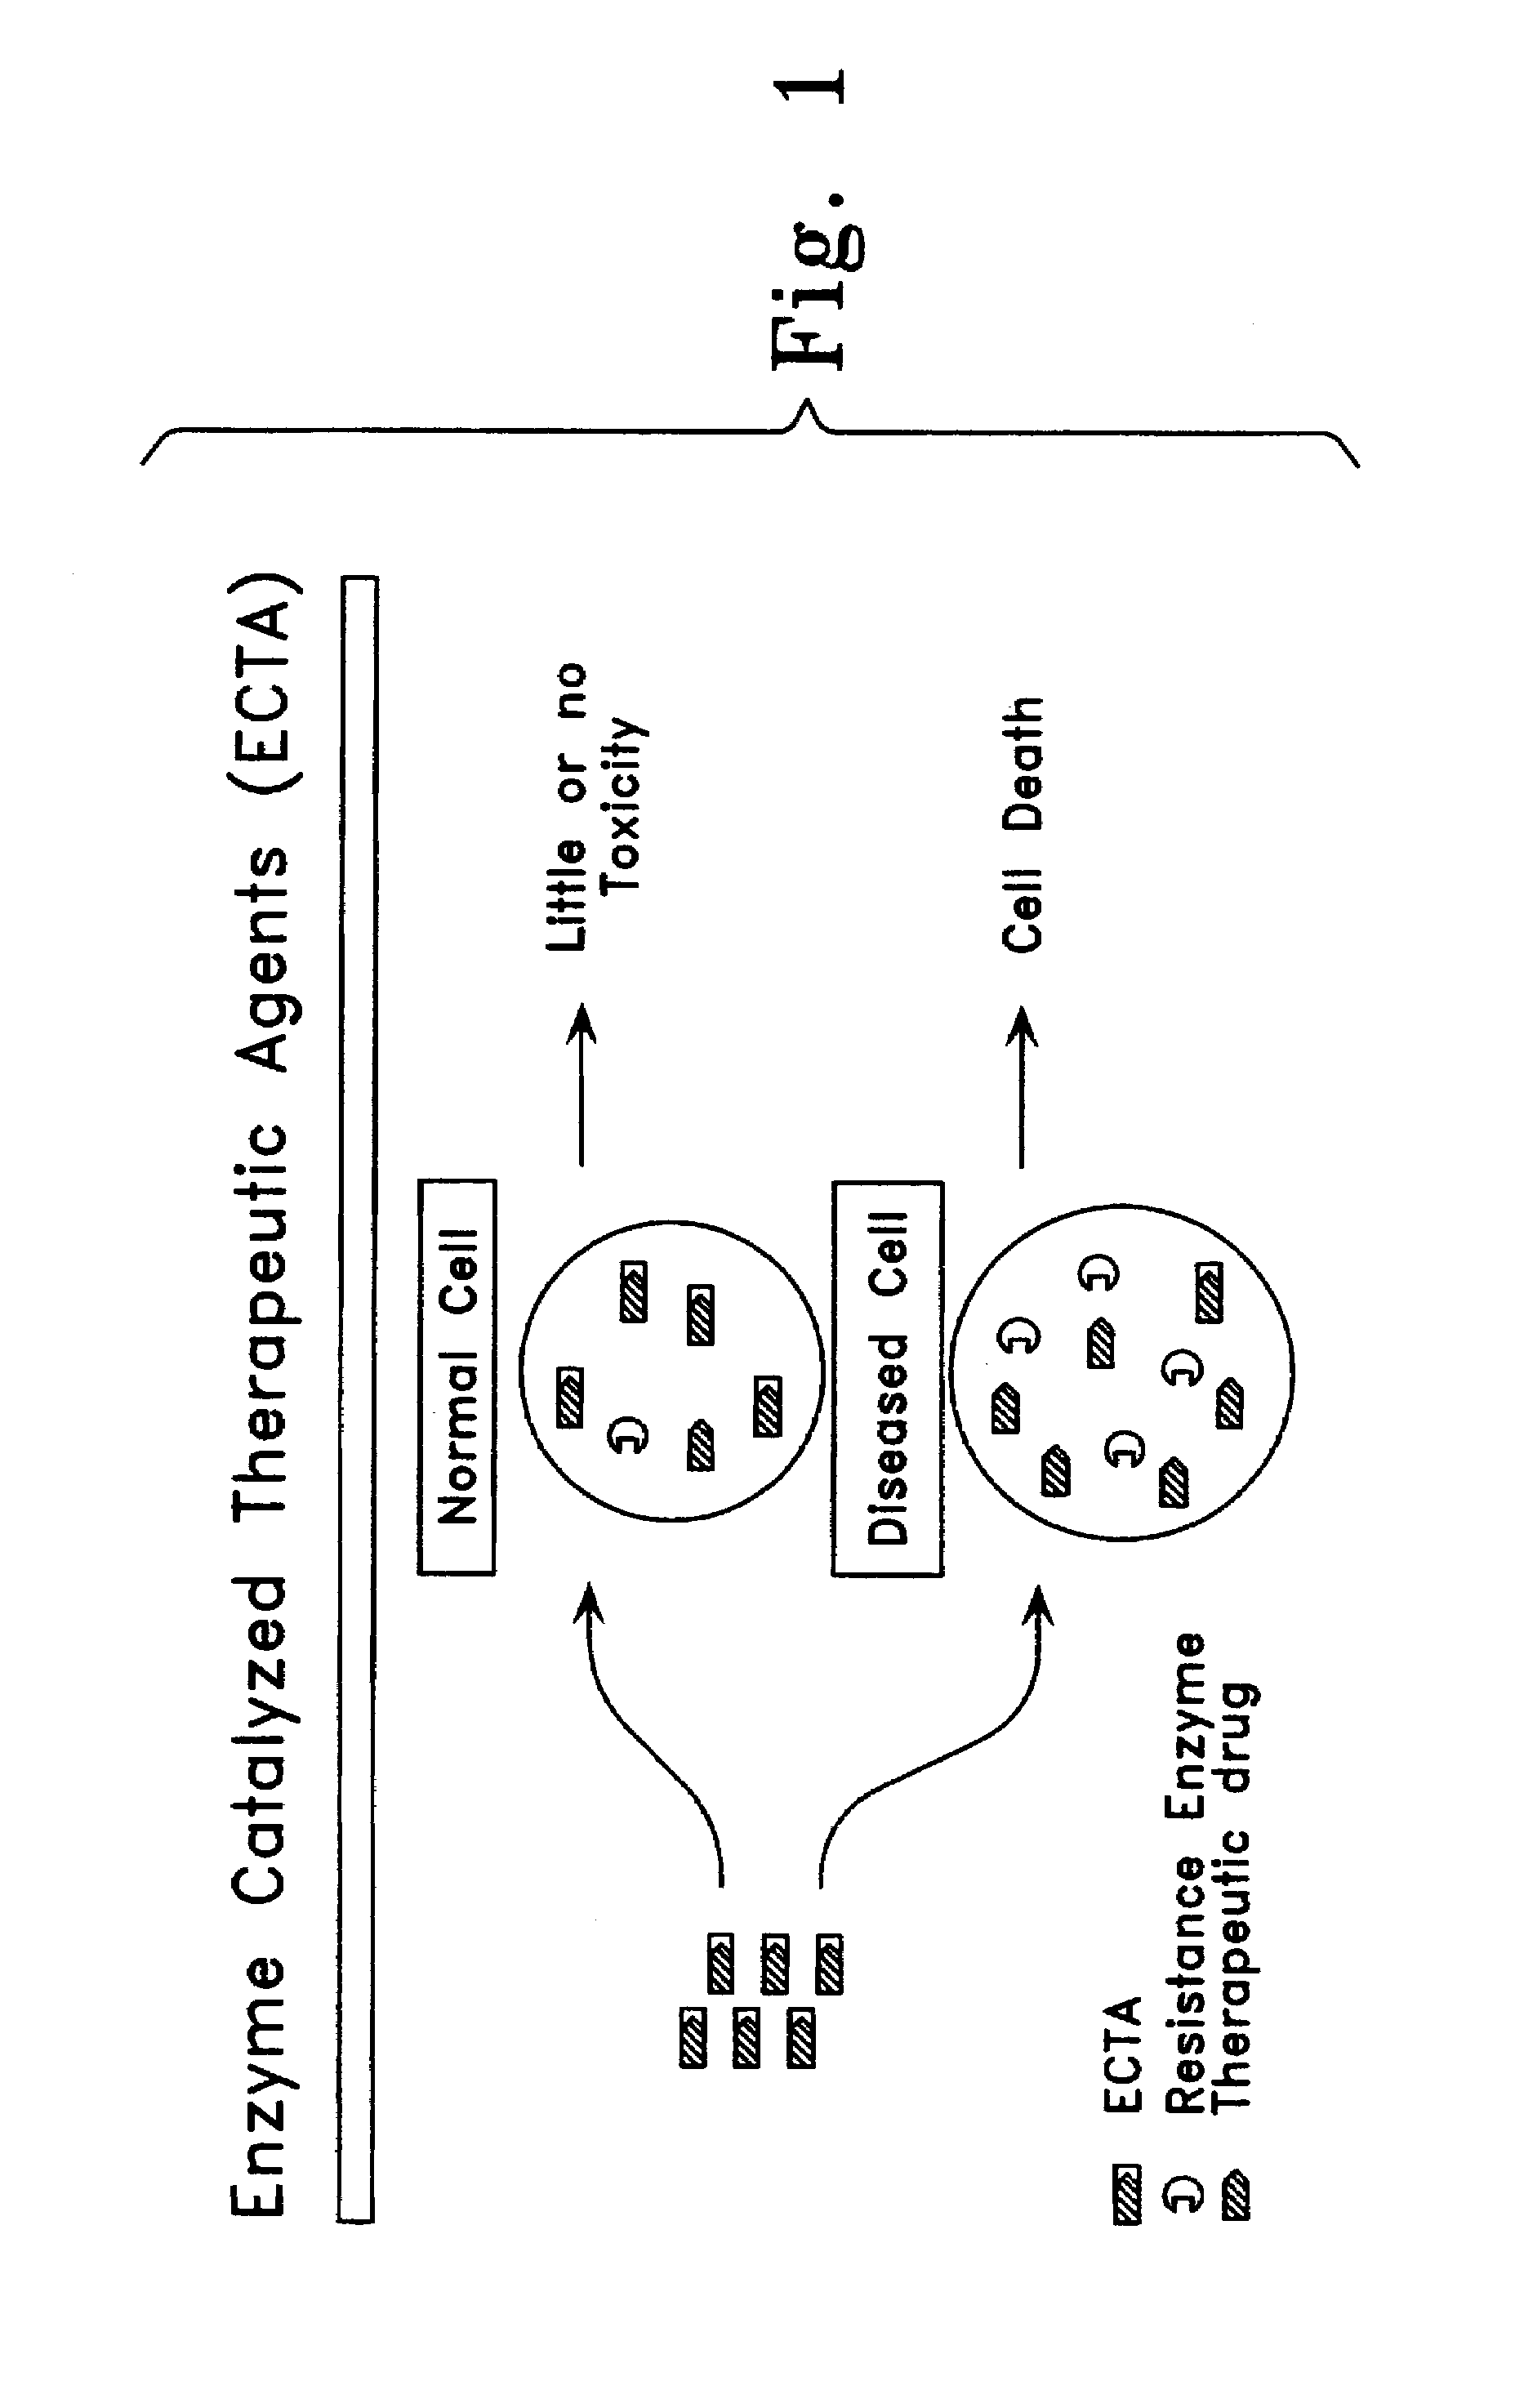 Methods for treating therapy-resistant tumors